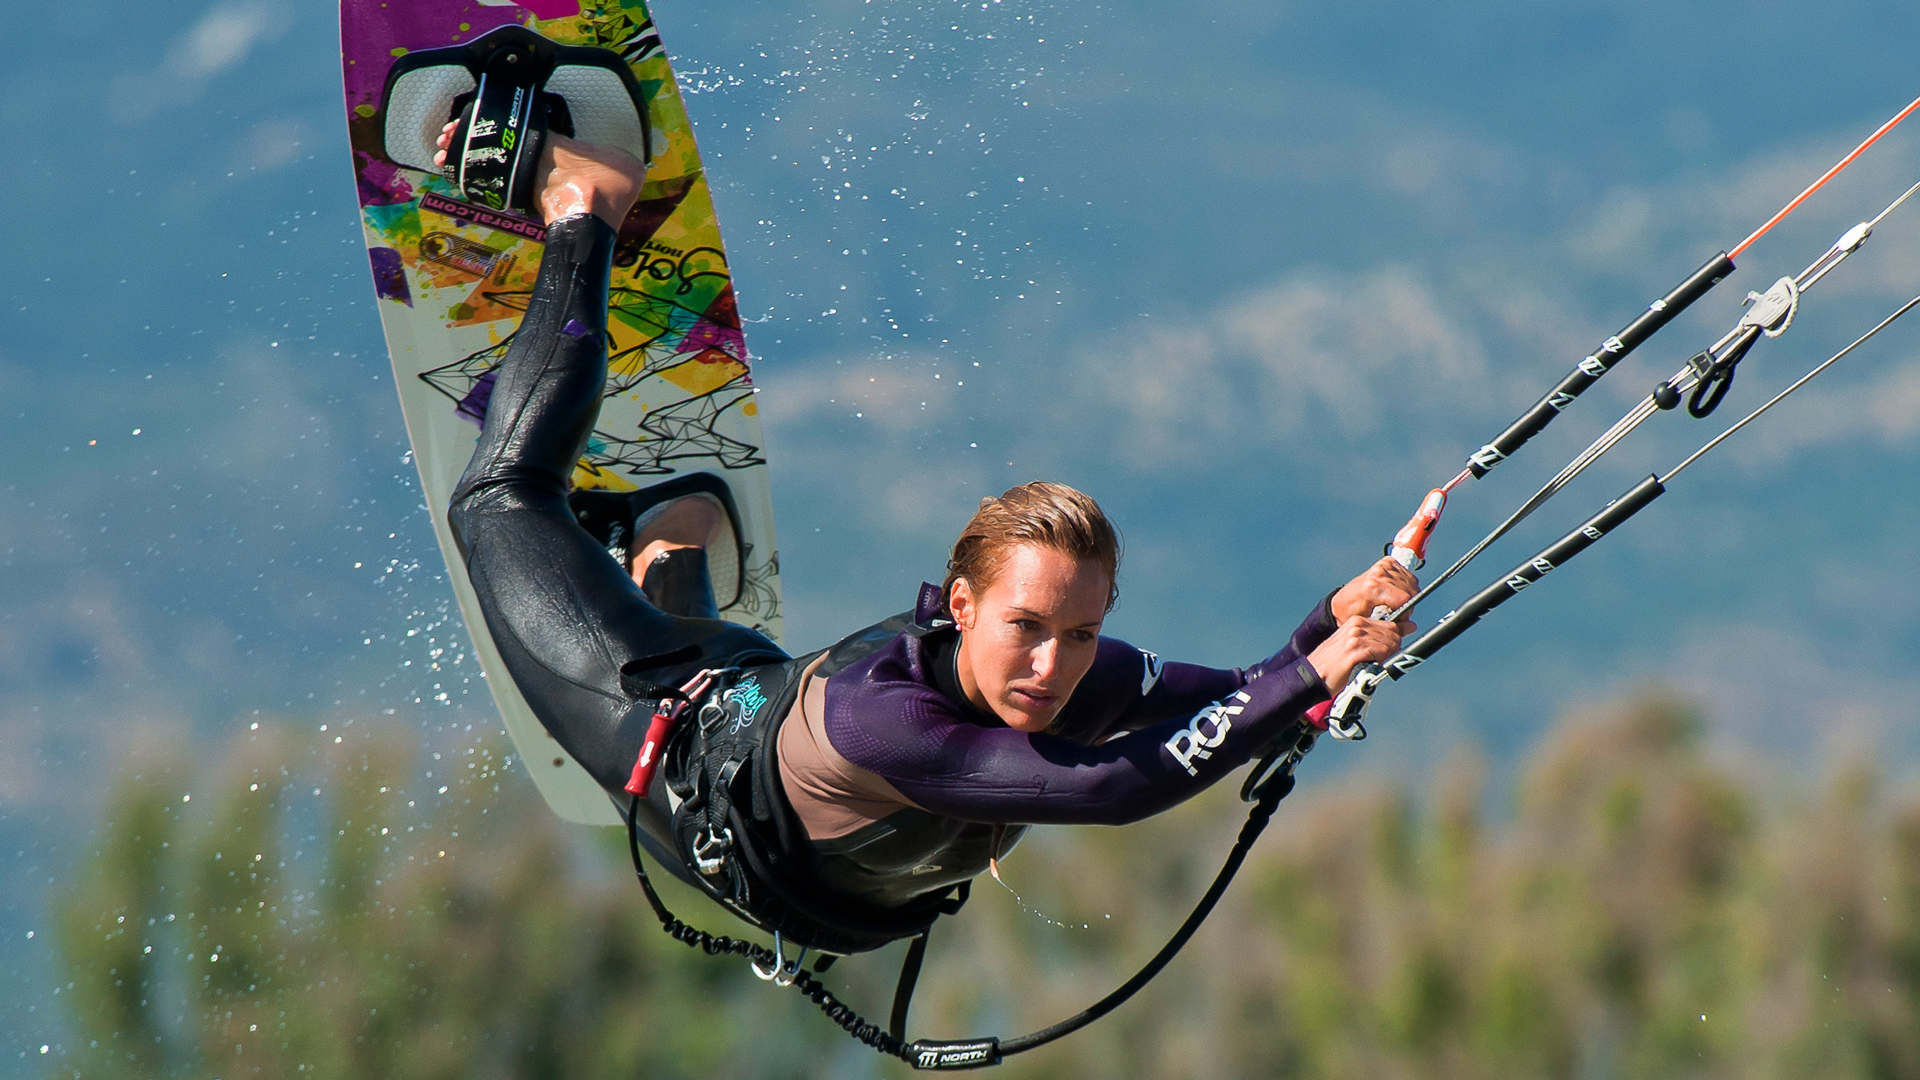 kitesurf wallpaper image - Angela Peral raily into town - in resolution: High Definition - HD 16:9 1920 X 1080